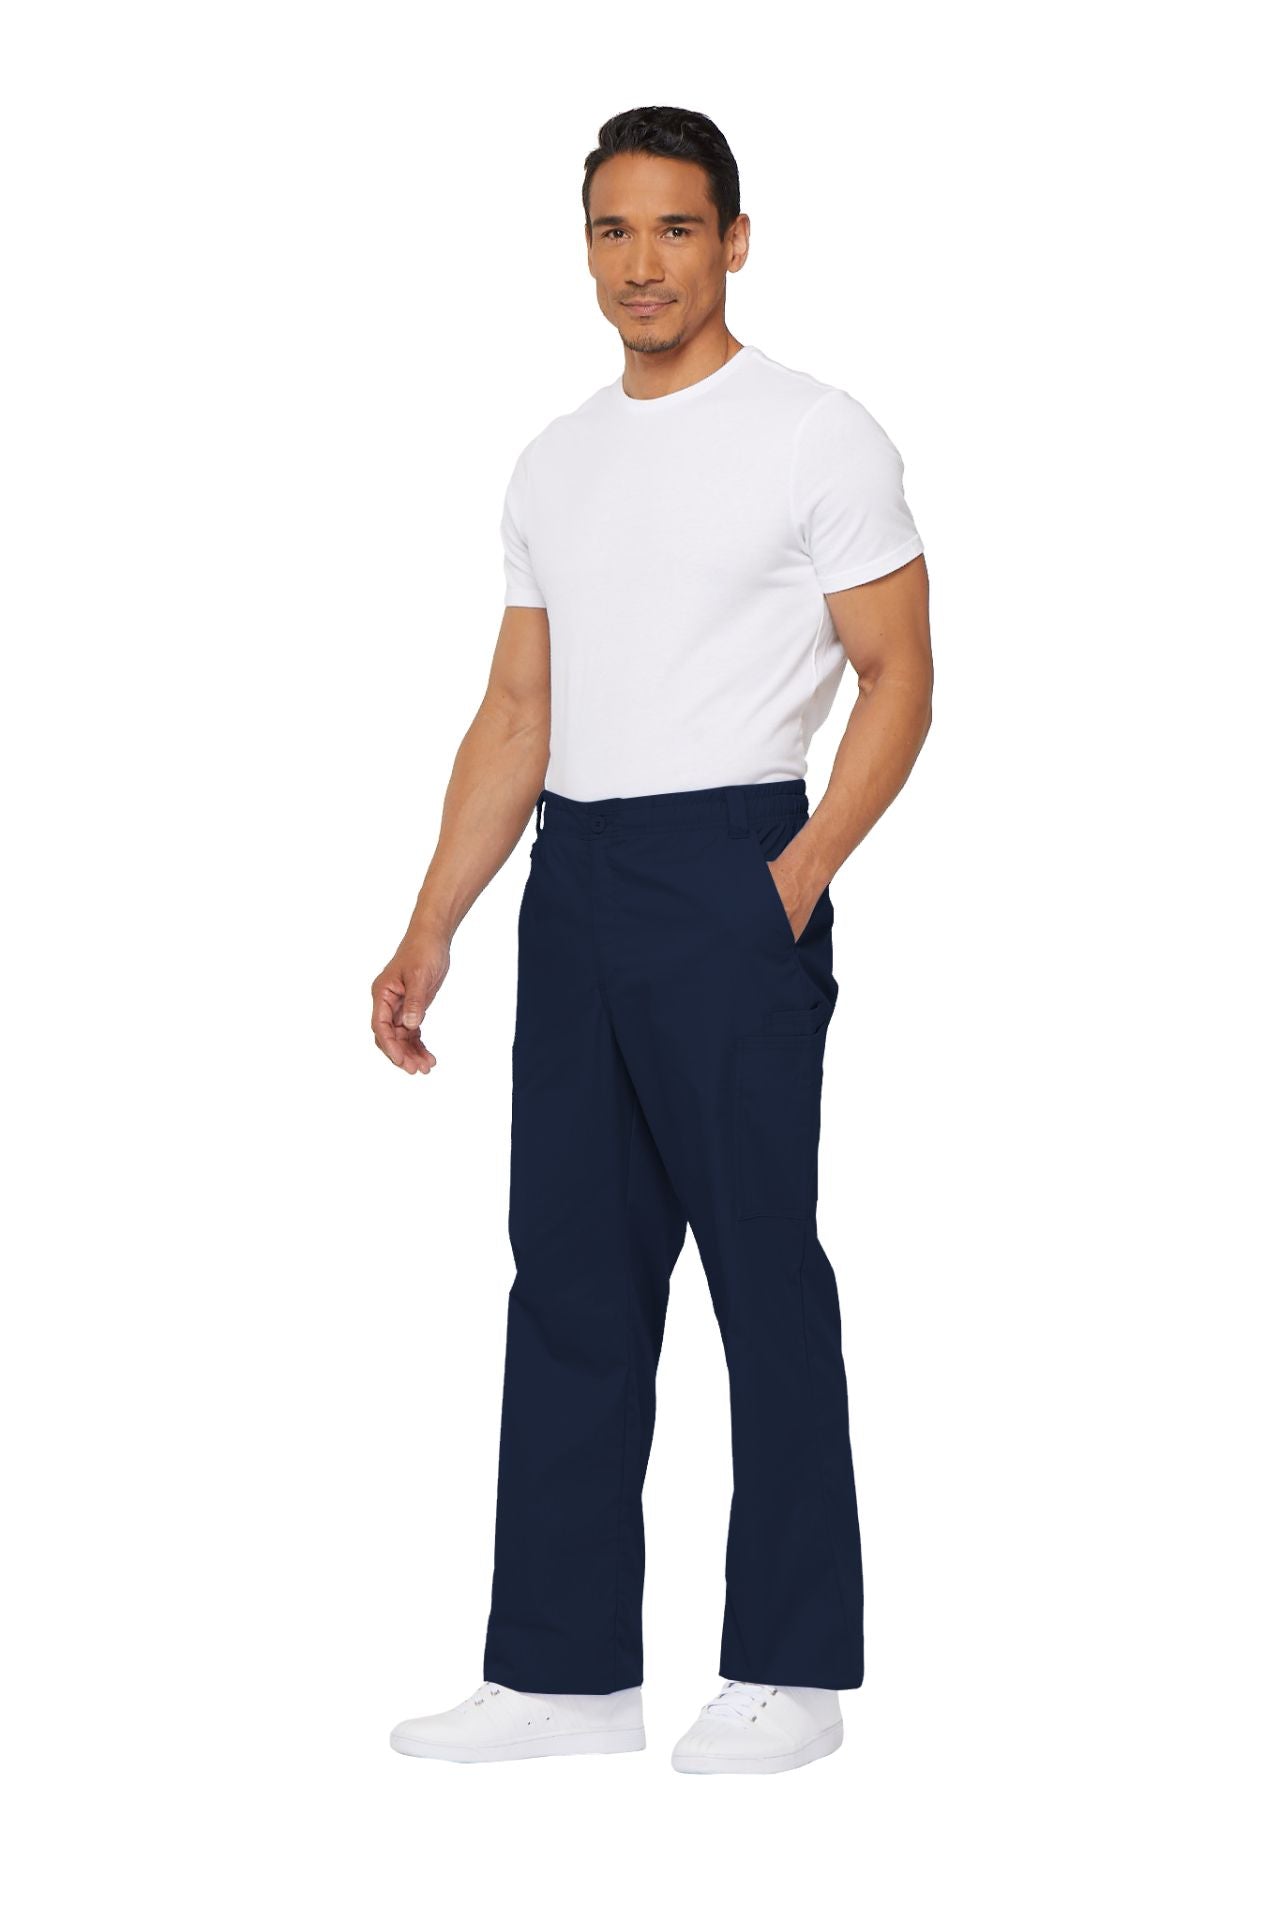 Navy - Dickies EDS Signature Men's Natural Rise Zip Fly Pull On Pant